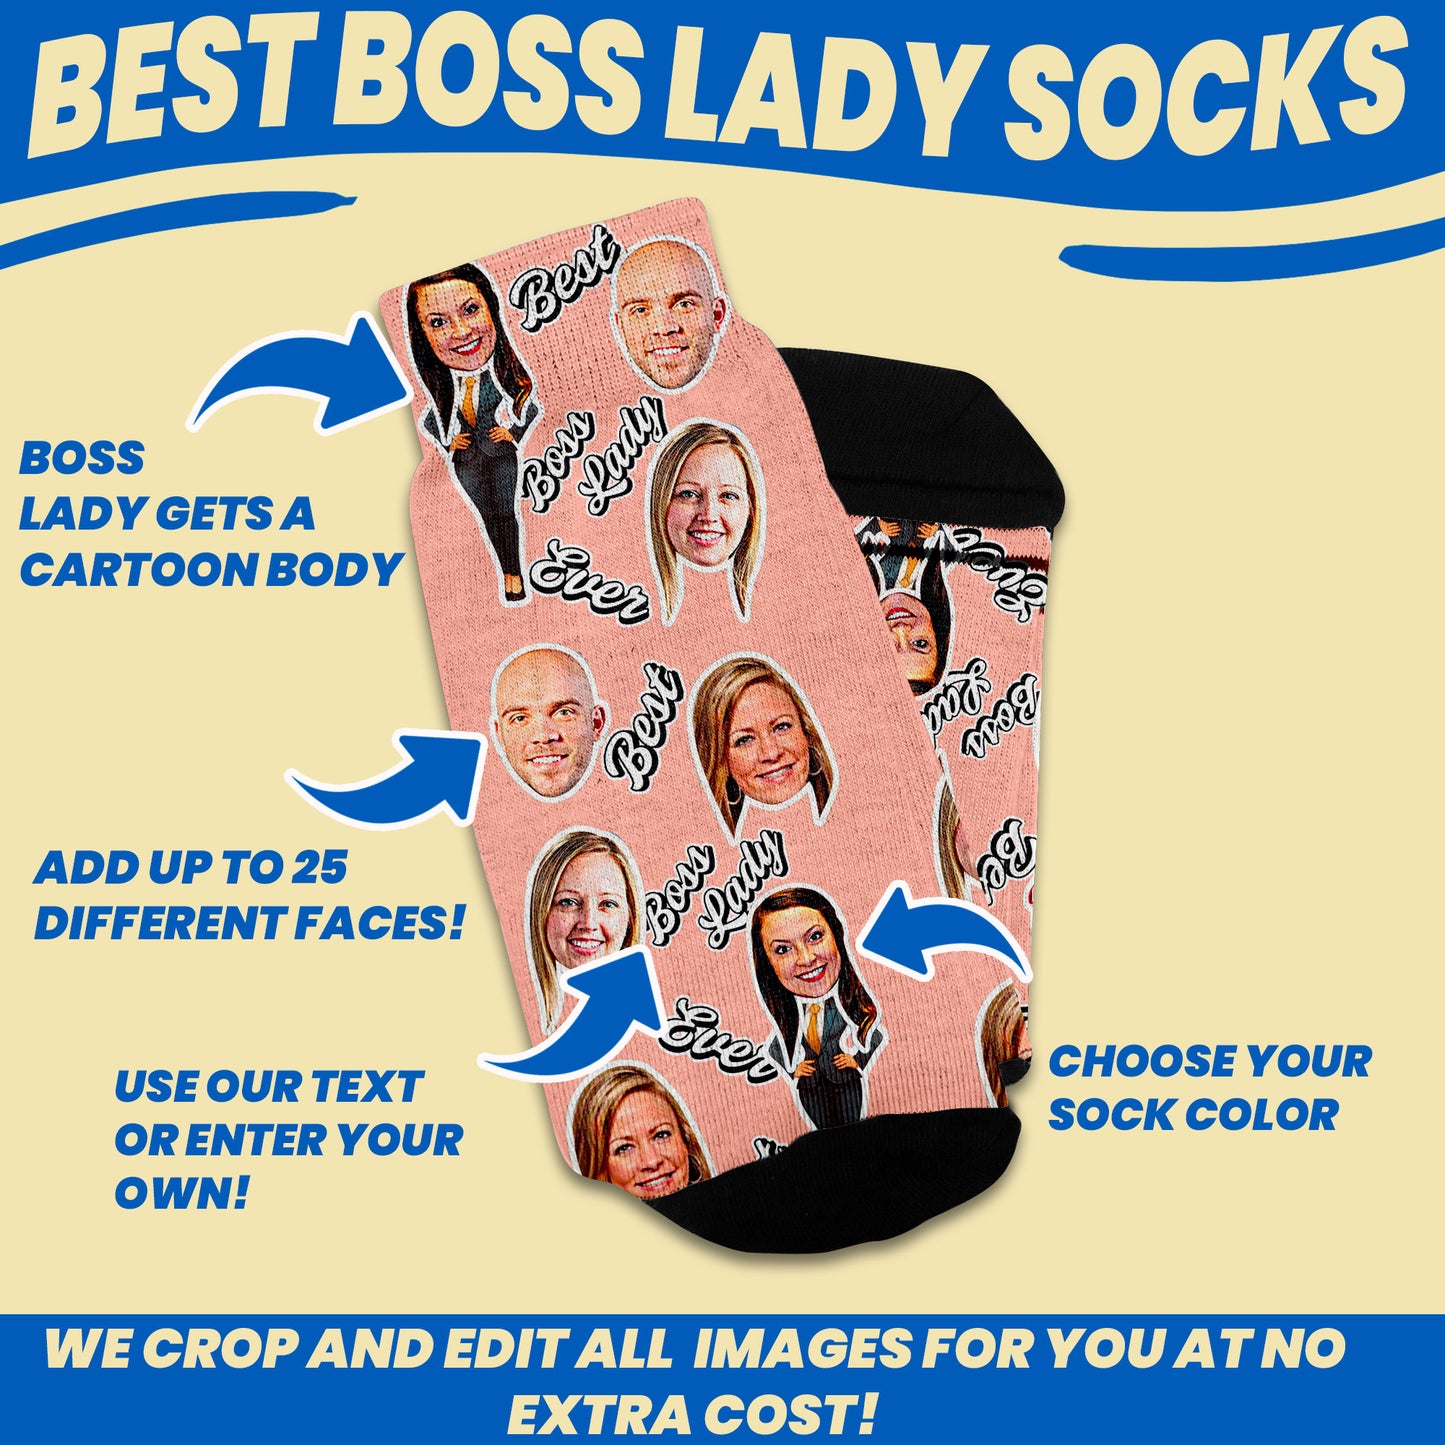 woman boss day gift personalized socks with faces customization options such as multiple faces, boss lady with cartoon body, text and sock color